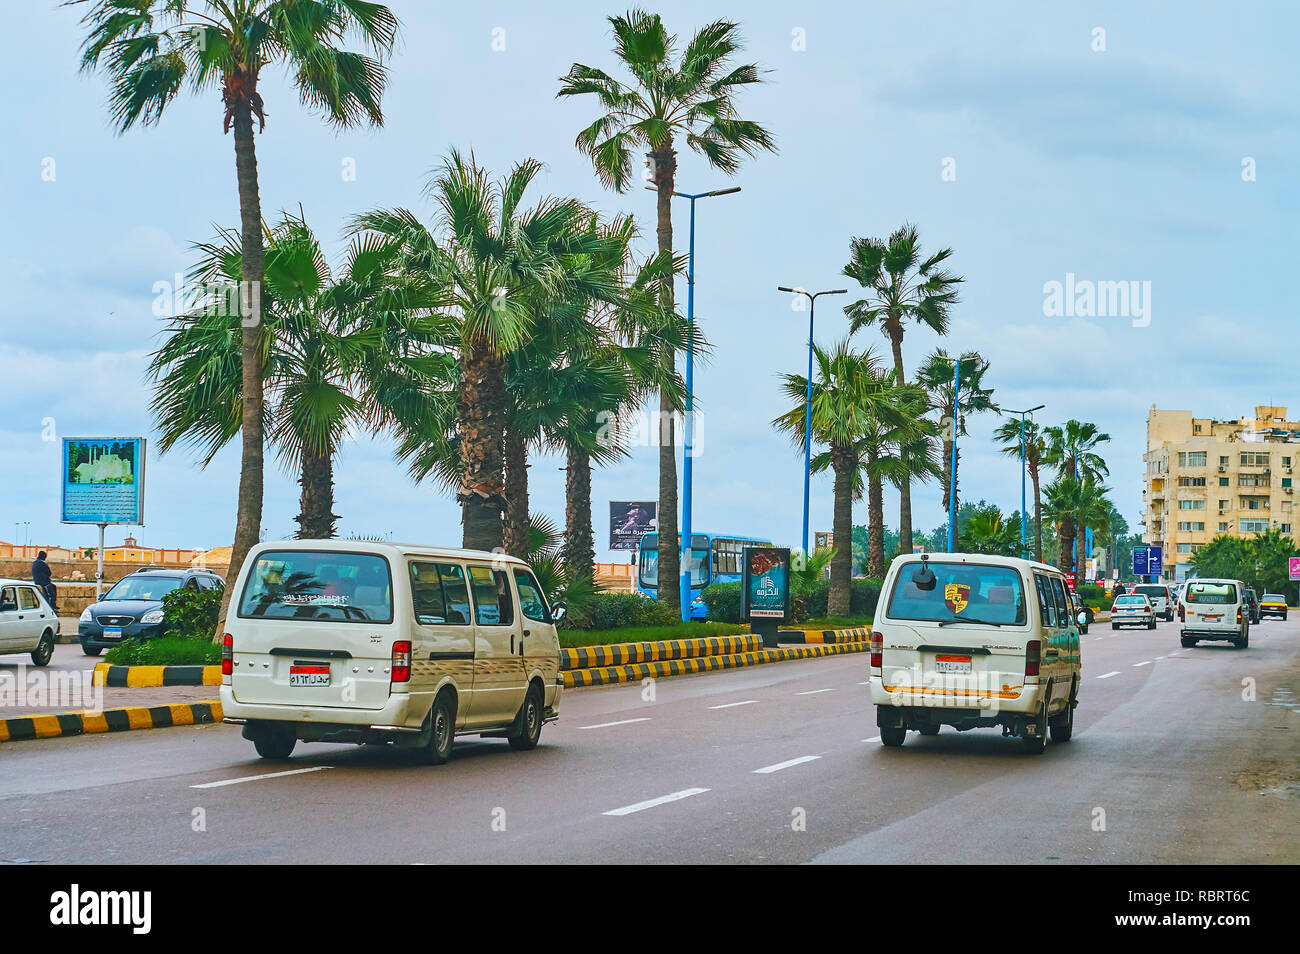 ALEXANDRIA, EGYPT - DECEMBER 19, 2017: The small microbuses drive along the Corniche Avenue, this type of public transport is popular and widely sprea Stock Photo